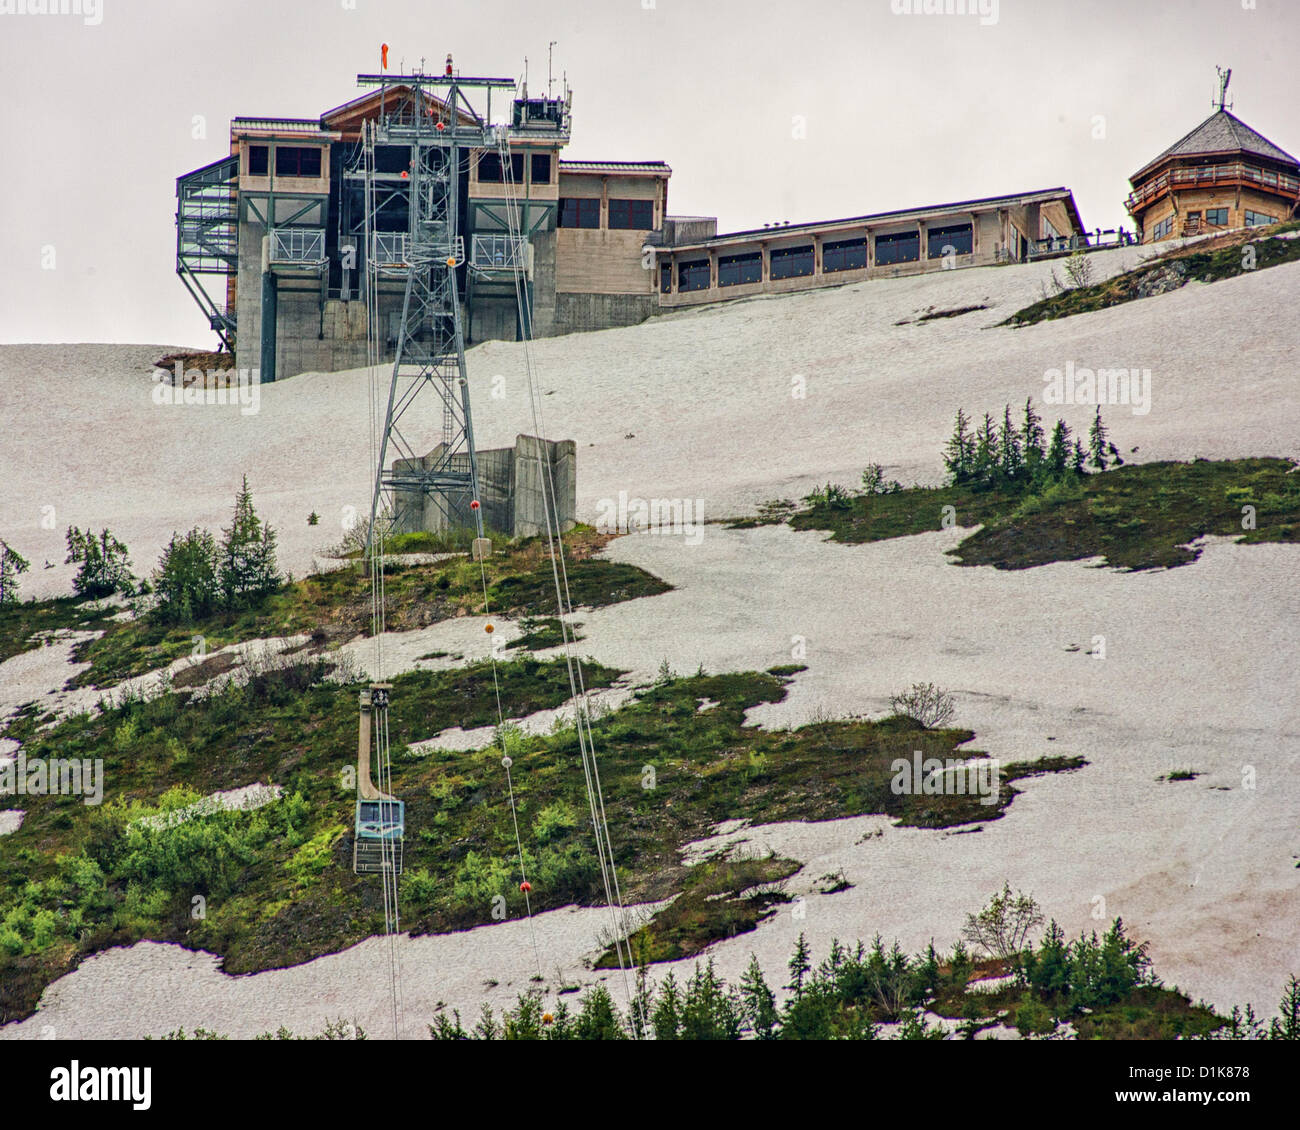 June 30, 2012 - Girdwood, Alaska, US - 60-passenger aerial trams of the Alyeska Resort Aerial Tramway are seen taking 26 mph scenic rides to and from the Mt Alyeska Upper Tram Terminal, 2,334 ft (711 m) above sea level, with its interconnected buildings housing the Roundhouse, a cafeteria, museum and the Seven Glaciers 4-star restaurant and bar. Part of the Chugach Mountain Range, located in Girdwood, Alaska, 27 mi (44Â km) from Anchorage, Mt. Alyeska is the biggest ski mountain in the state. (Credit Image: © Arnold Drapkin/ZUMAPRESS.com) Stock Photo